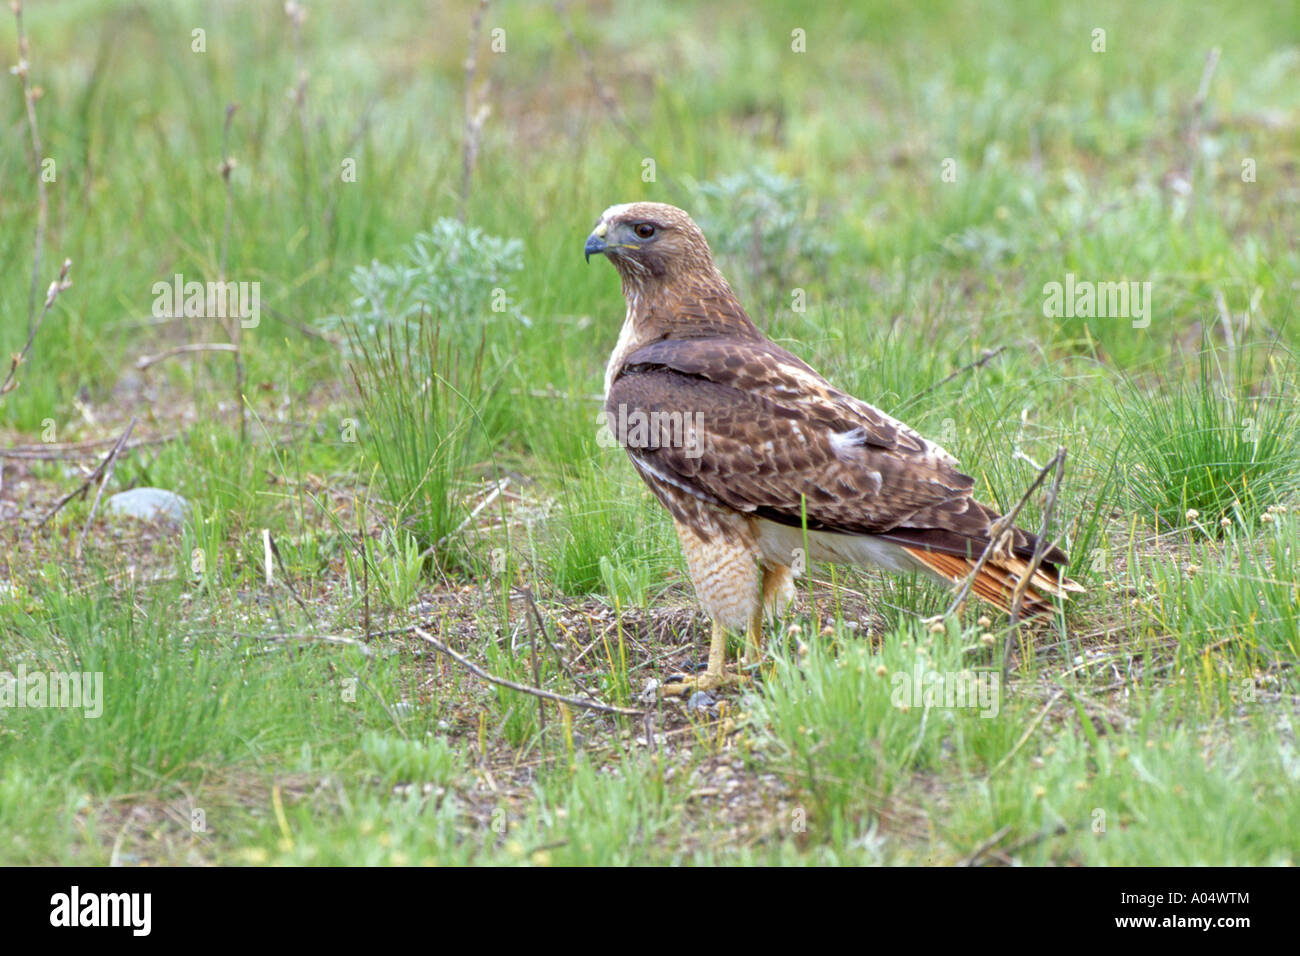 Red tailed poiana, Red tailed Hawk (Buteo jamaicensis) stando a terra Foto Stock